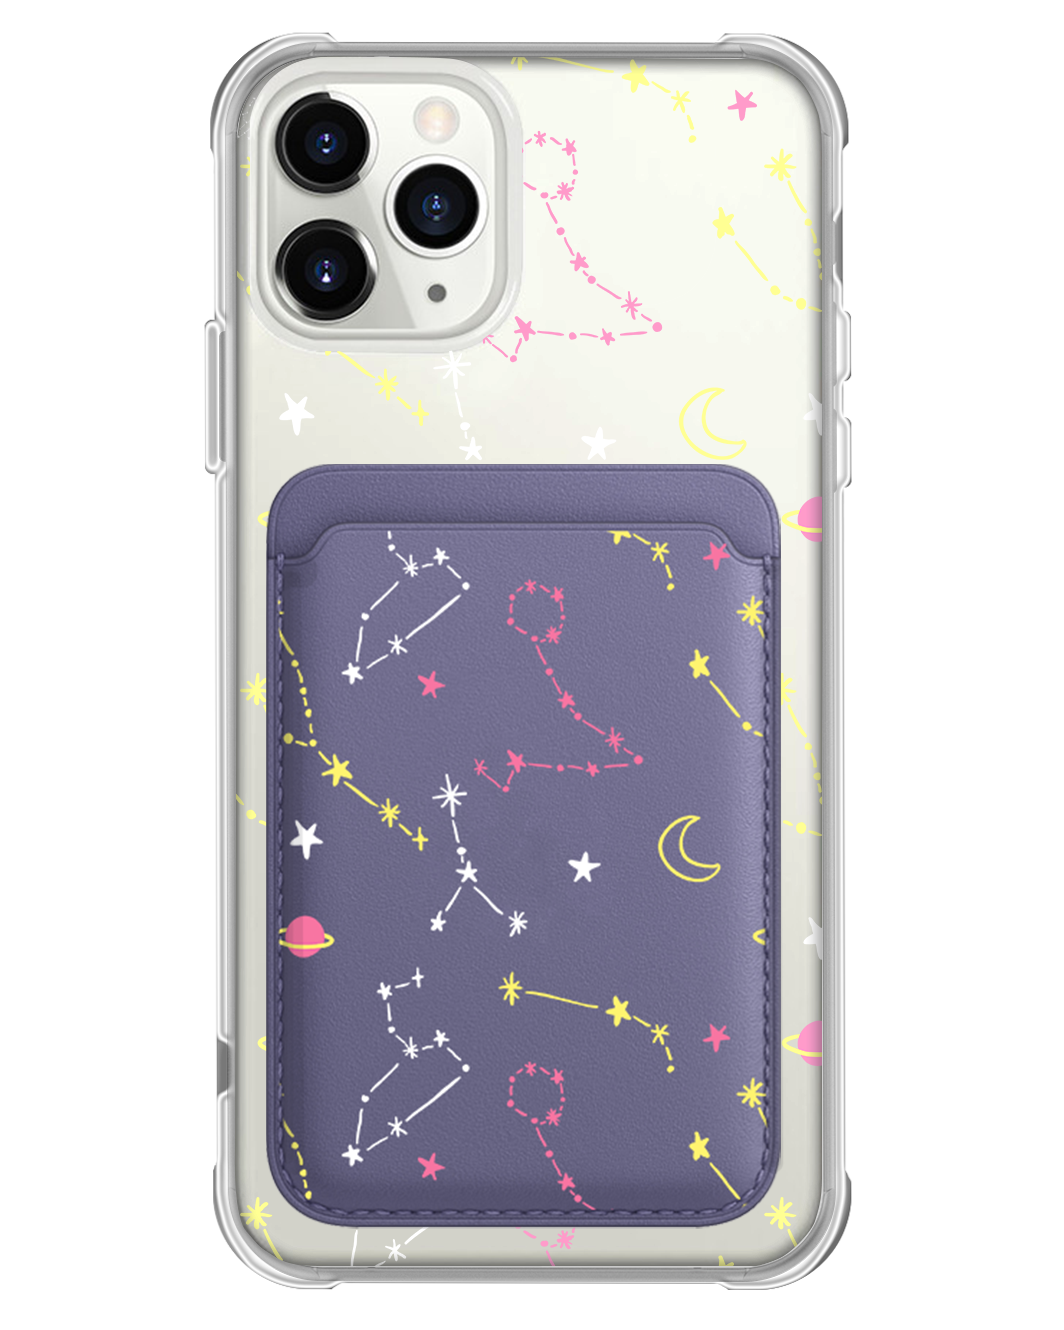 iPhone Magnetic Wallet Case - Constellation Candy